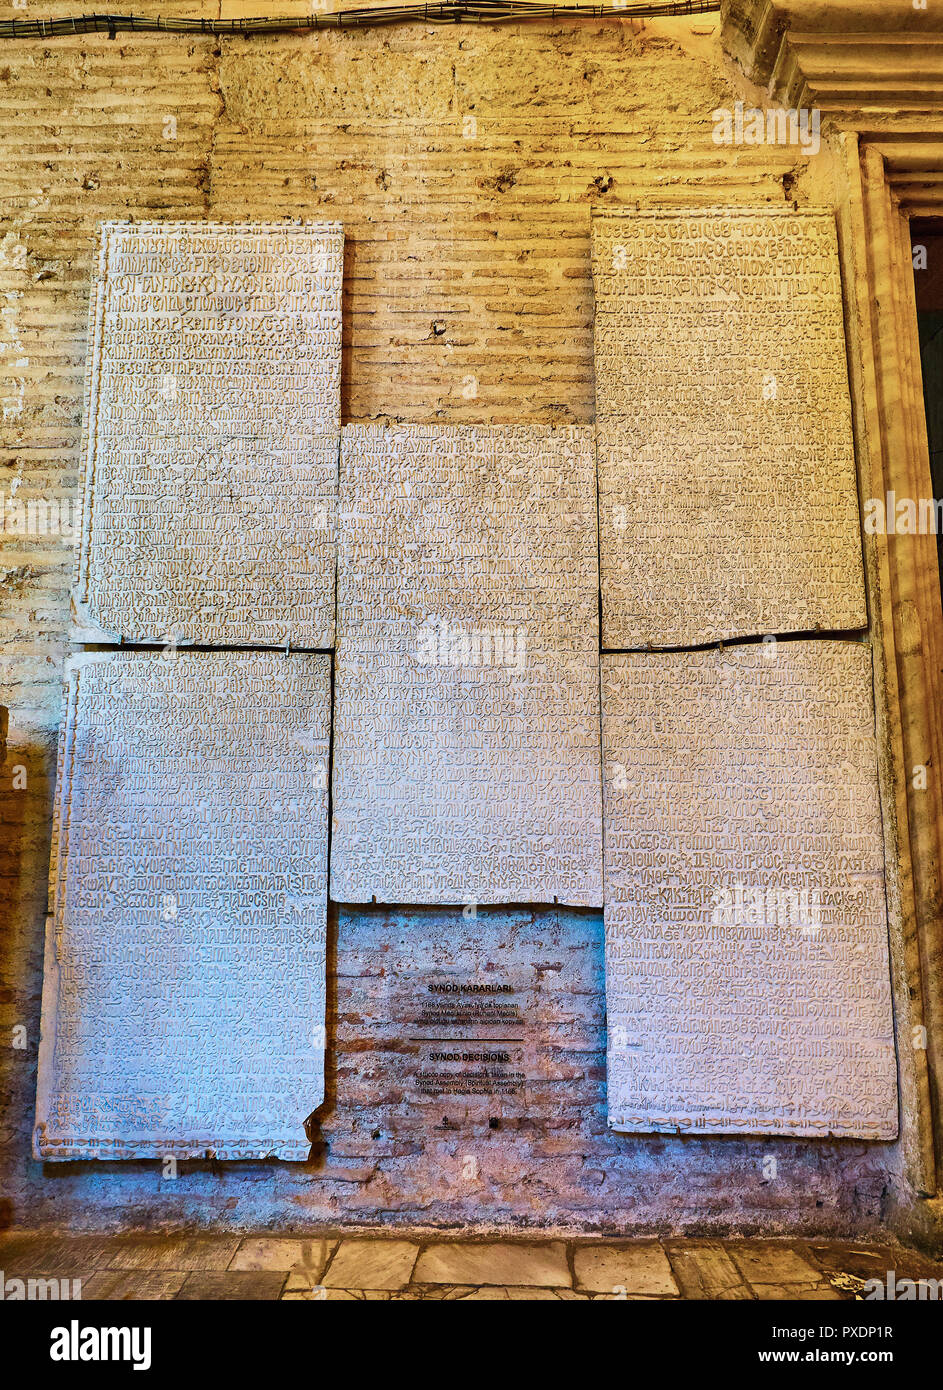 Partial record of the Synod decisions, stucco copy of decisions taken in the Synod Spiritual Assembly. Istanbul, Turkey. Stock Photo